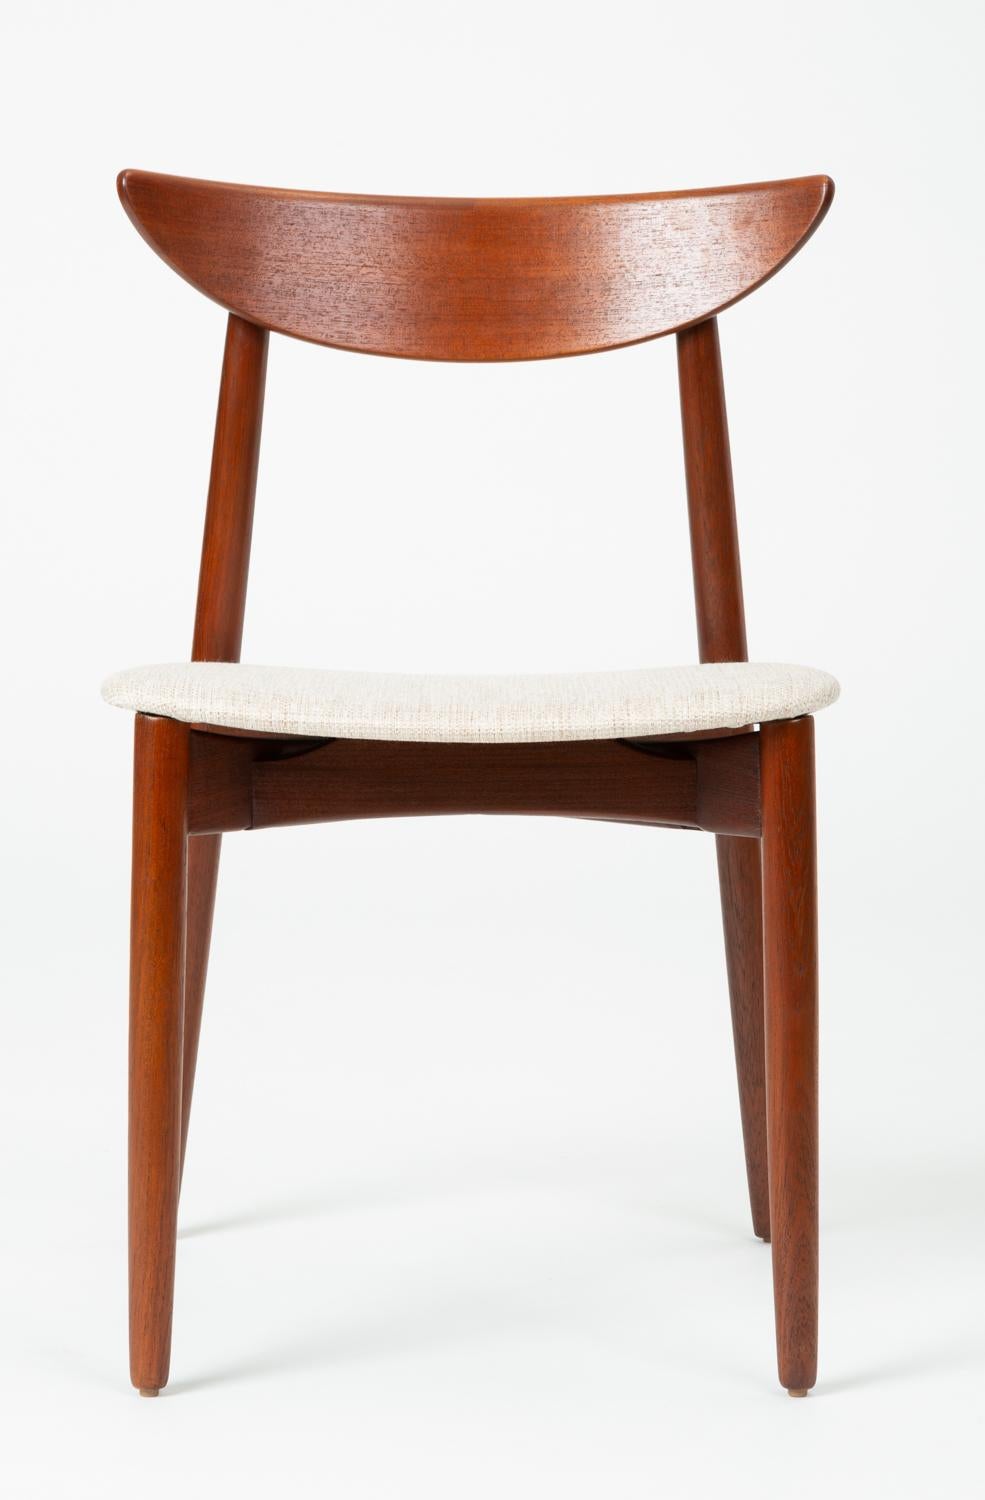 Designed circa 1960 by Harry Østergaard, this desk, dining or accent chair was manufactured in Denmark by Randers Møbelfabrik. The chair was imported, like many other Randers designs, by the Long Beach-based Moreddi for sale in their partner